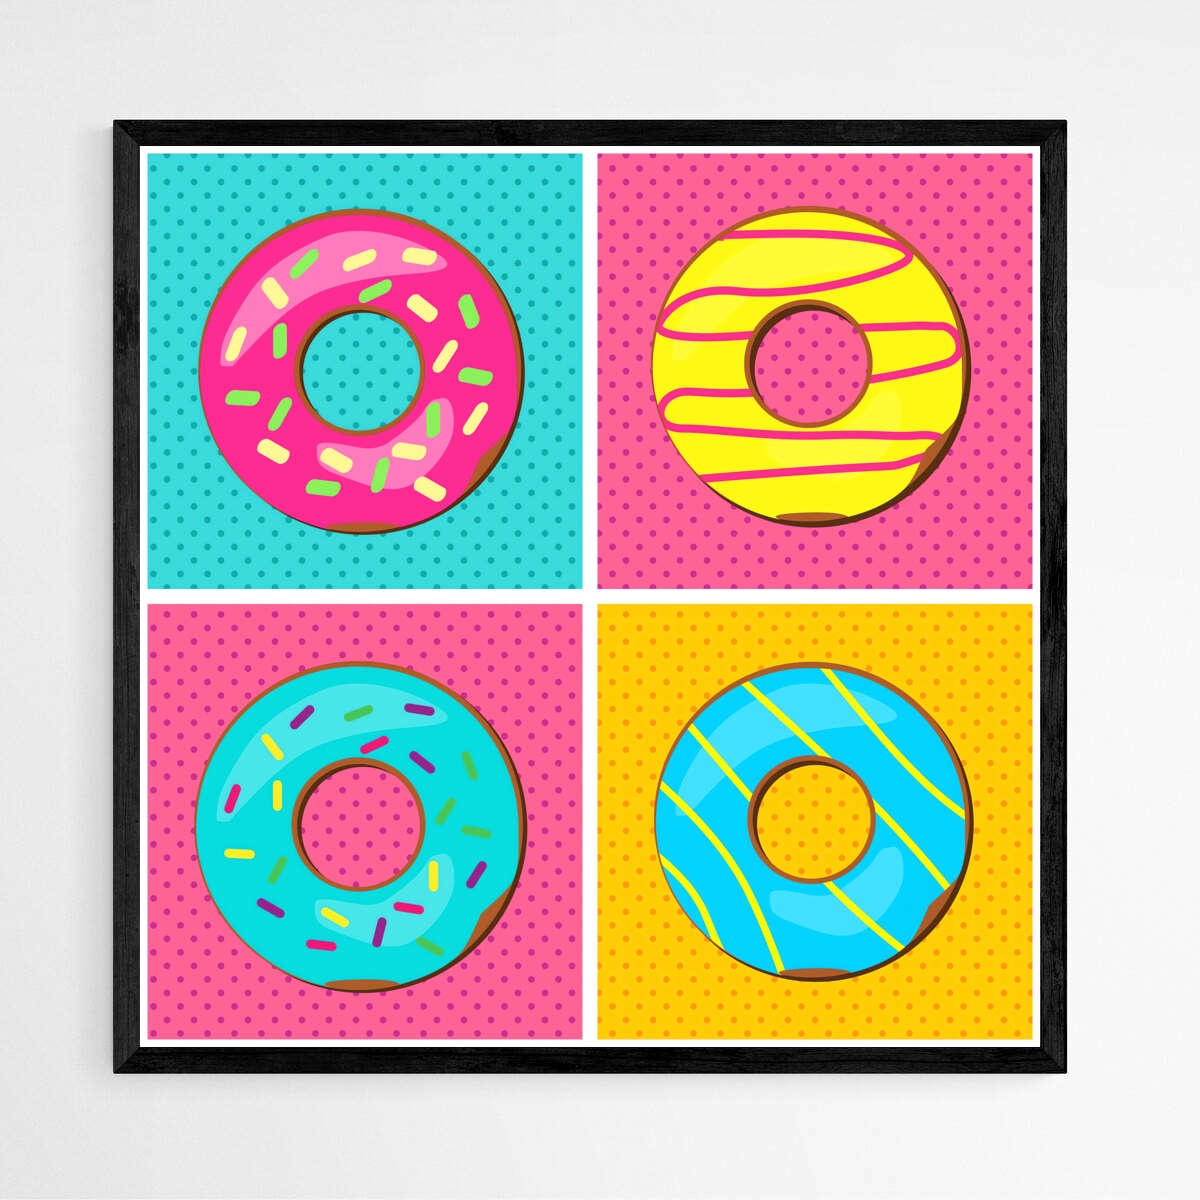 Square Delights Donut | Pop Art Wall Art Prints - The Canvas Hive